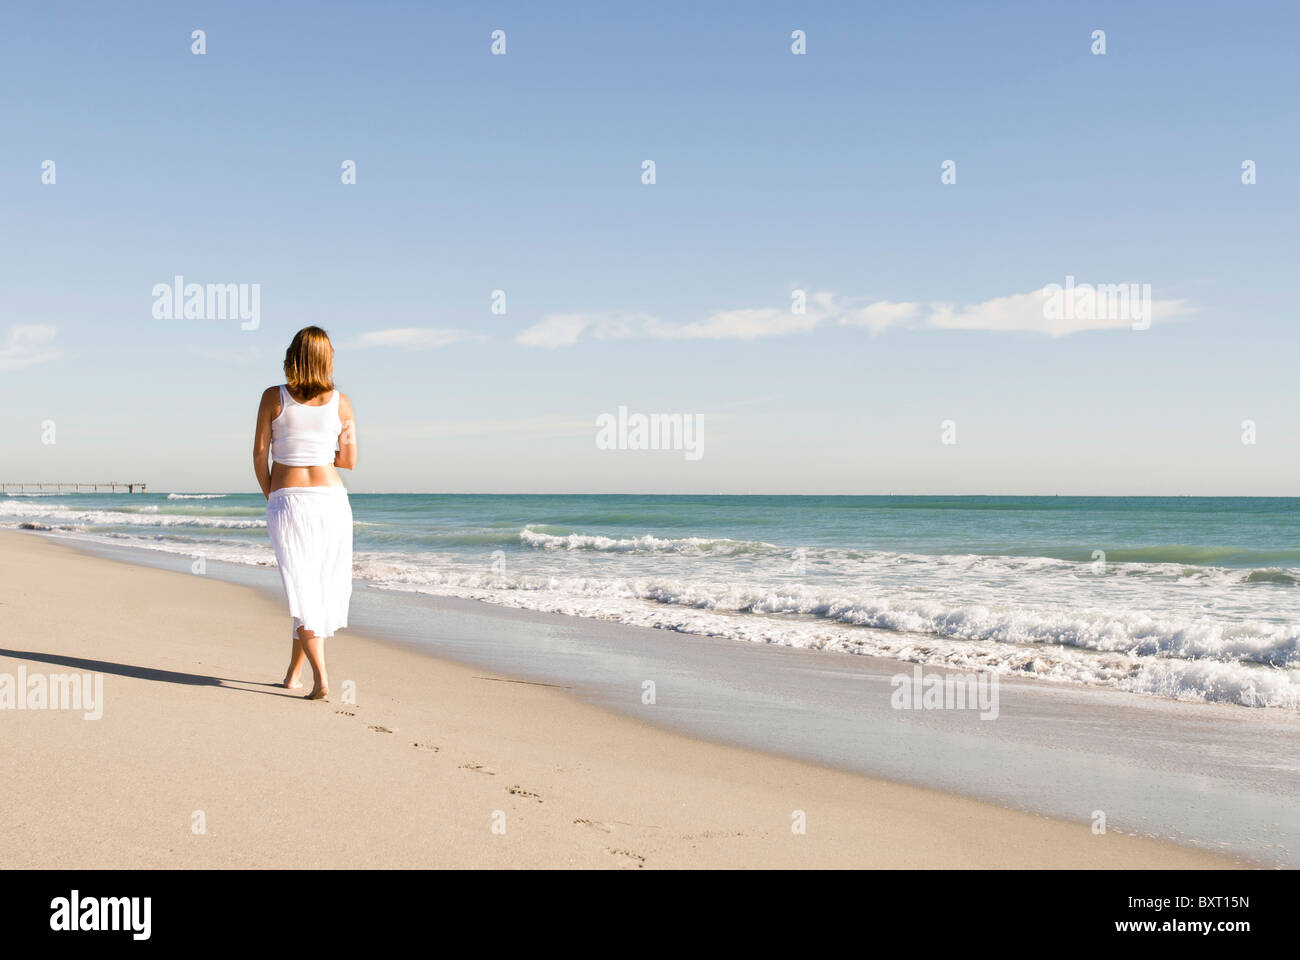 Pregnant woman walking on beach Banque D'Images